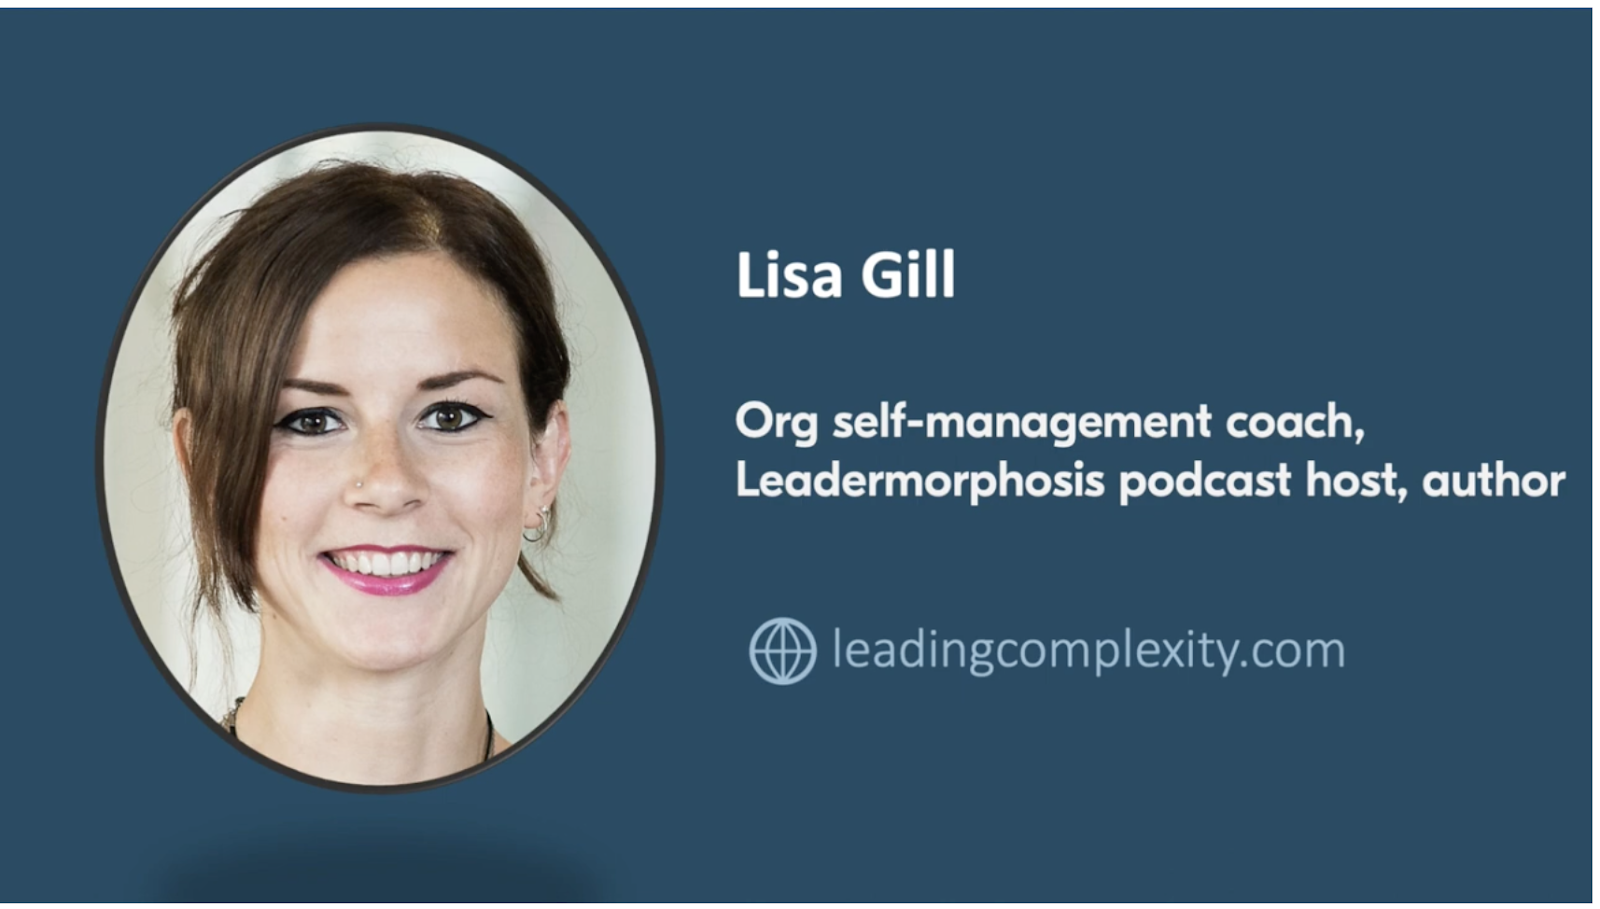 Continue reading: Summary of Lisa Gill’s session in the Leading Complexity Program 2022